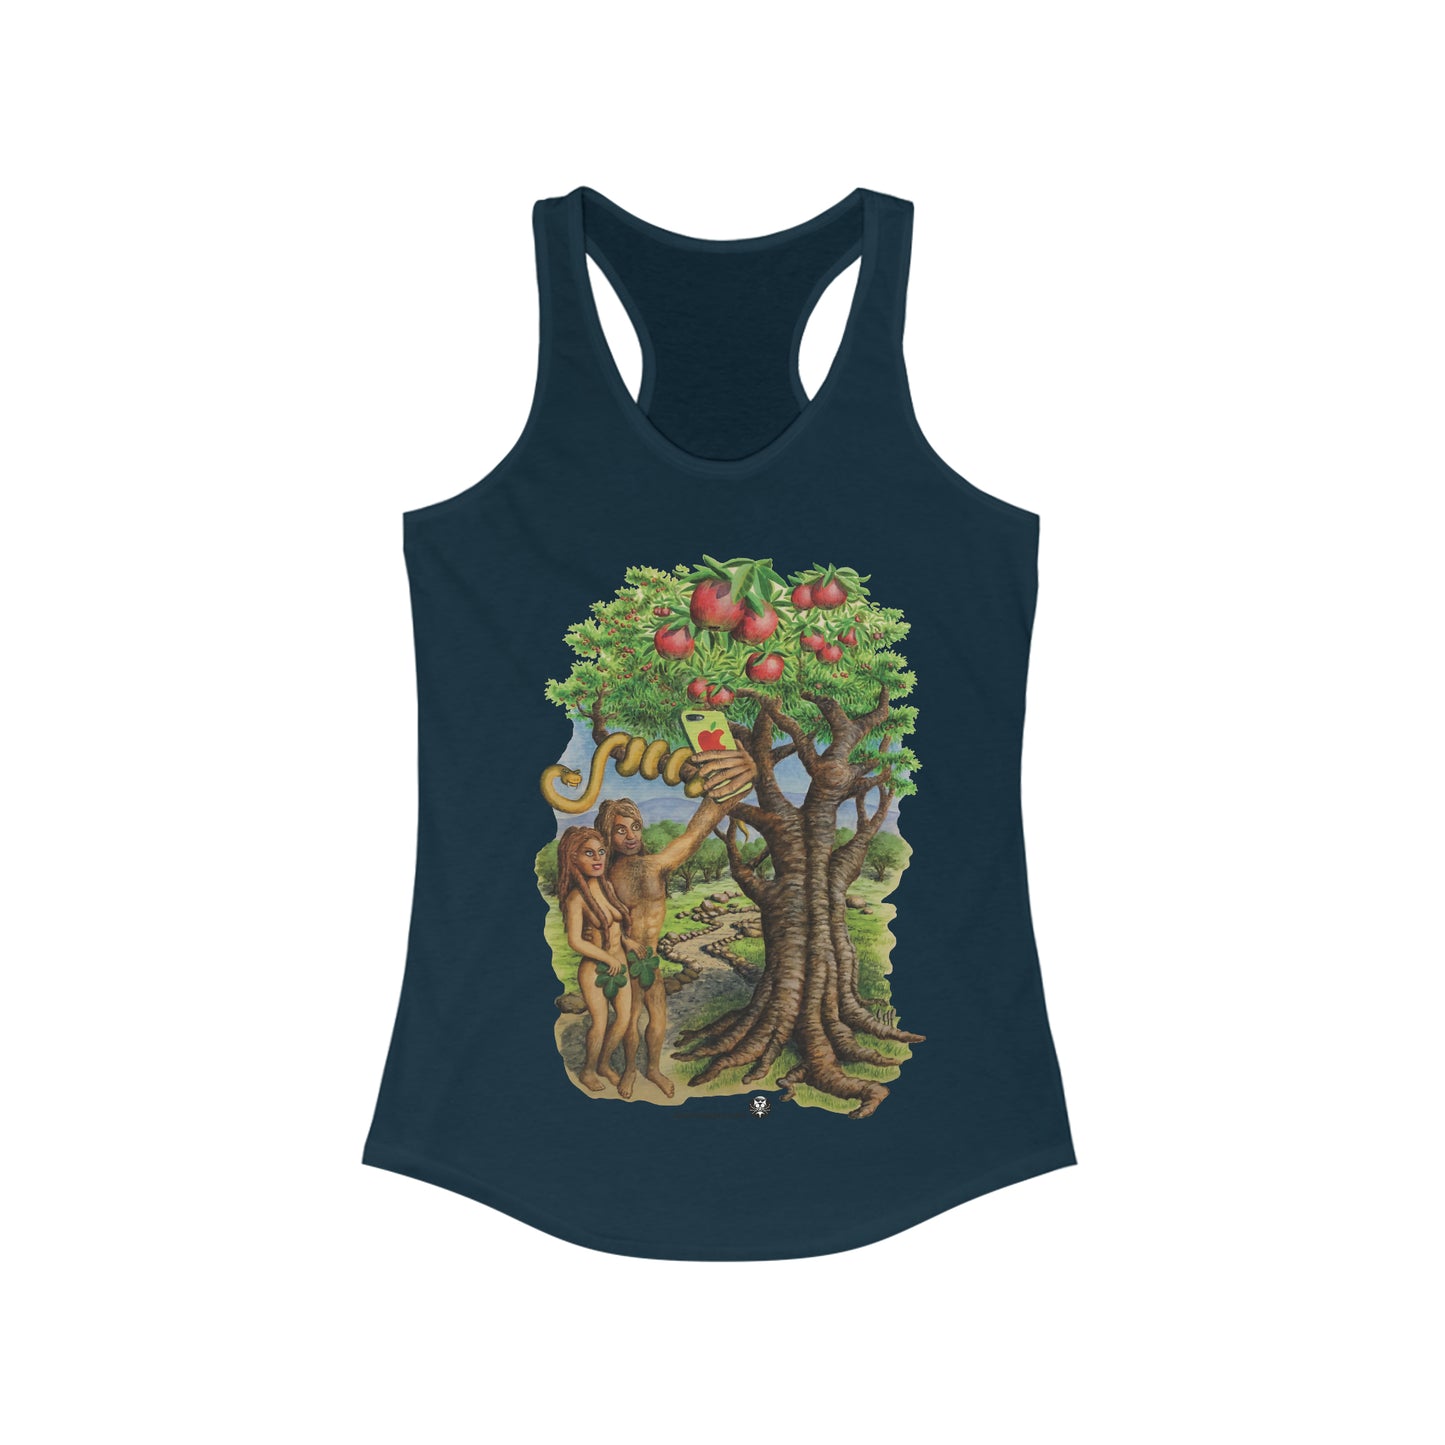 Apple and Eve - Women's Tank